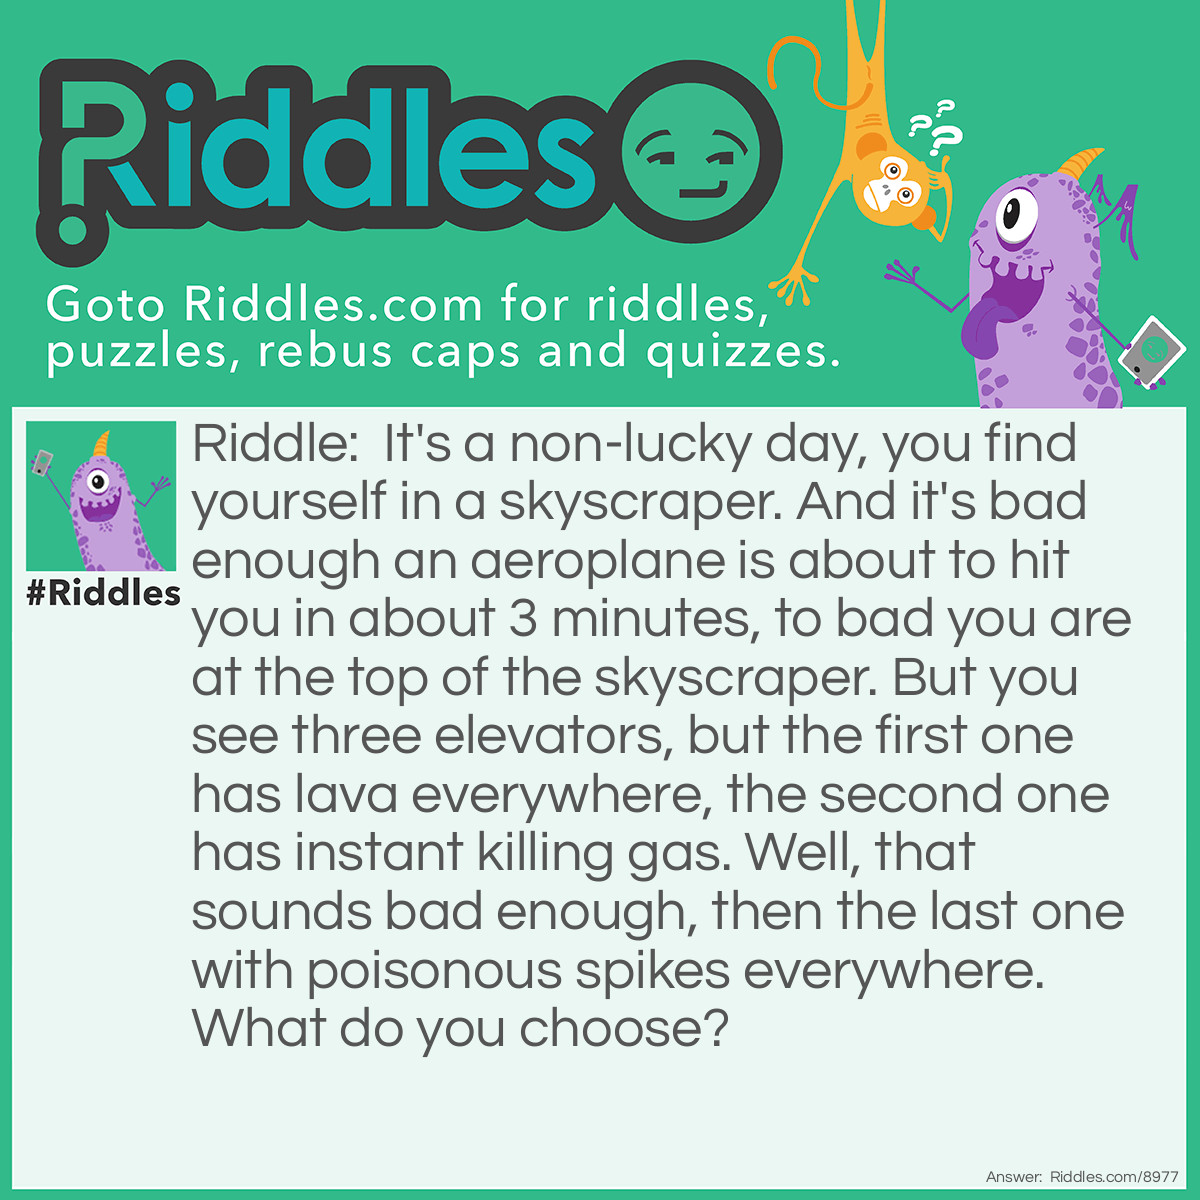 Riddle: It's a non-lucky day, you find yourself in a skyscraper. And it's bad enough an aeroplane is about to hit you in about 3 minutes, to bad you are at the top of the skyscraper. But you see three elevators, but the first one has lava everywhere, the second one has instant killing gas. Well, that sounds bad enough, then the last one with poisonous spikes everywhere. What do you choose? Answer: The first one is the correct answer. The lava would likely already turn into stone, by the time.